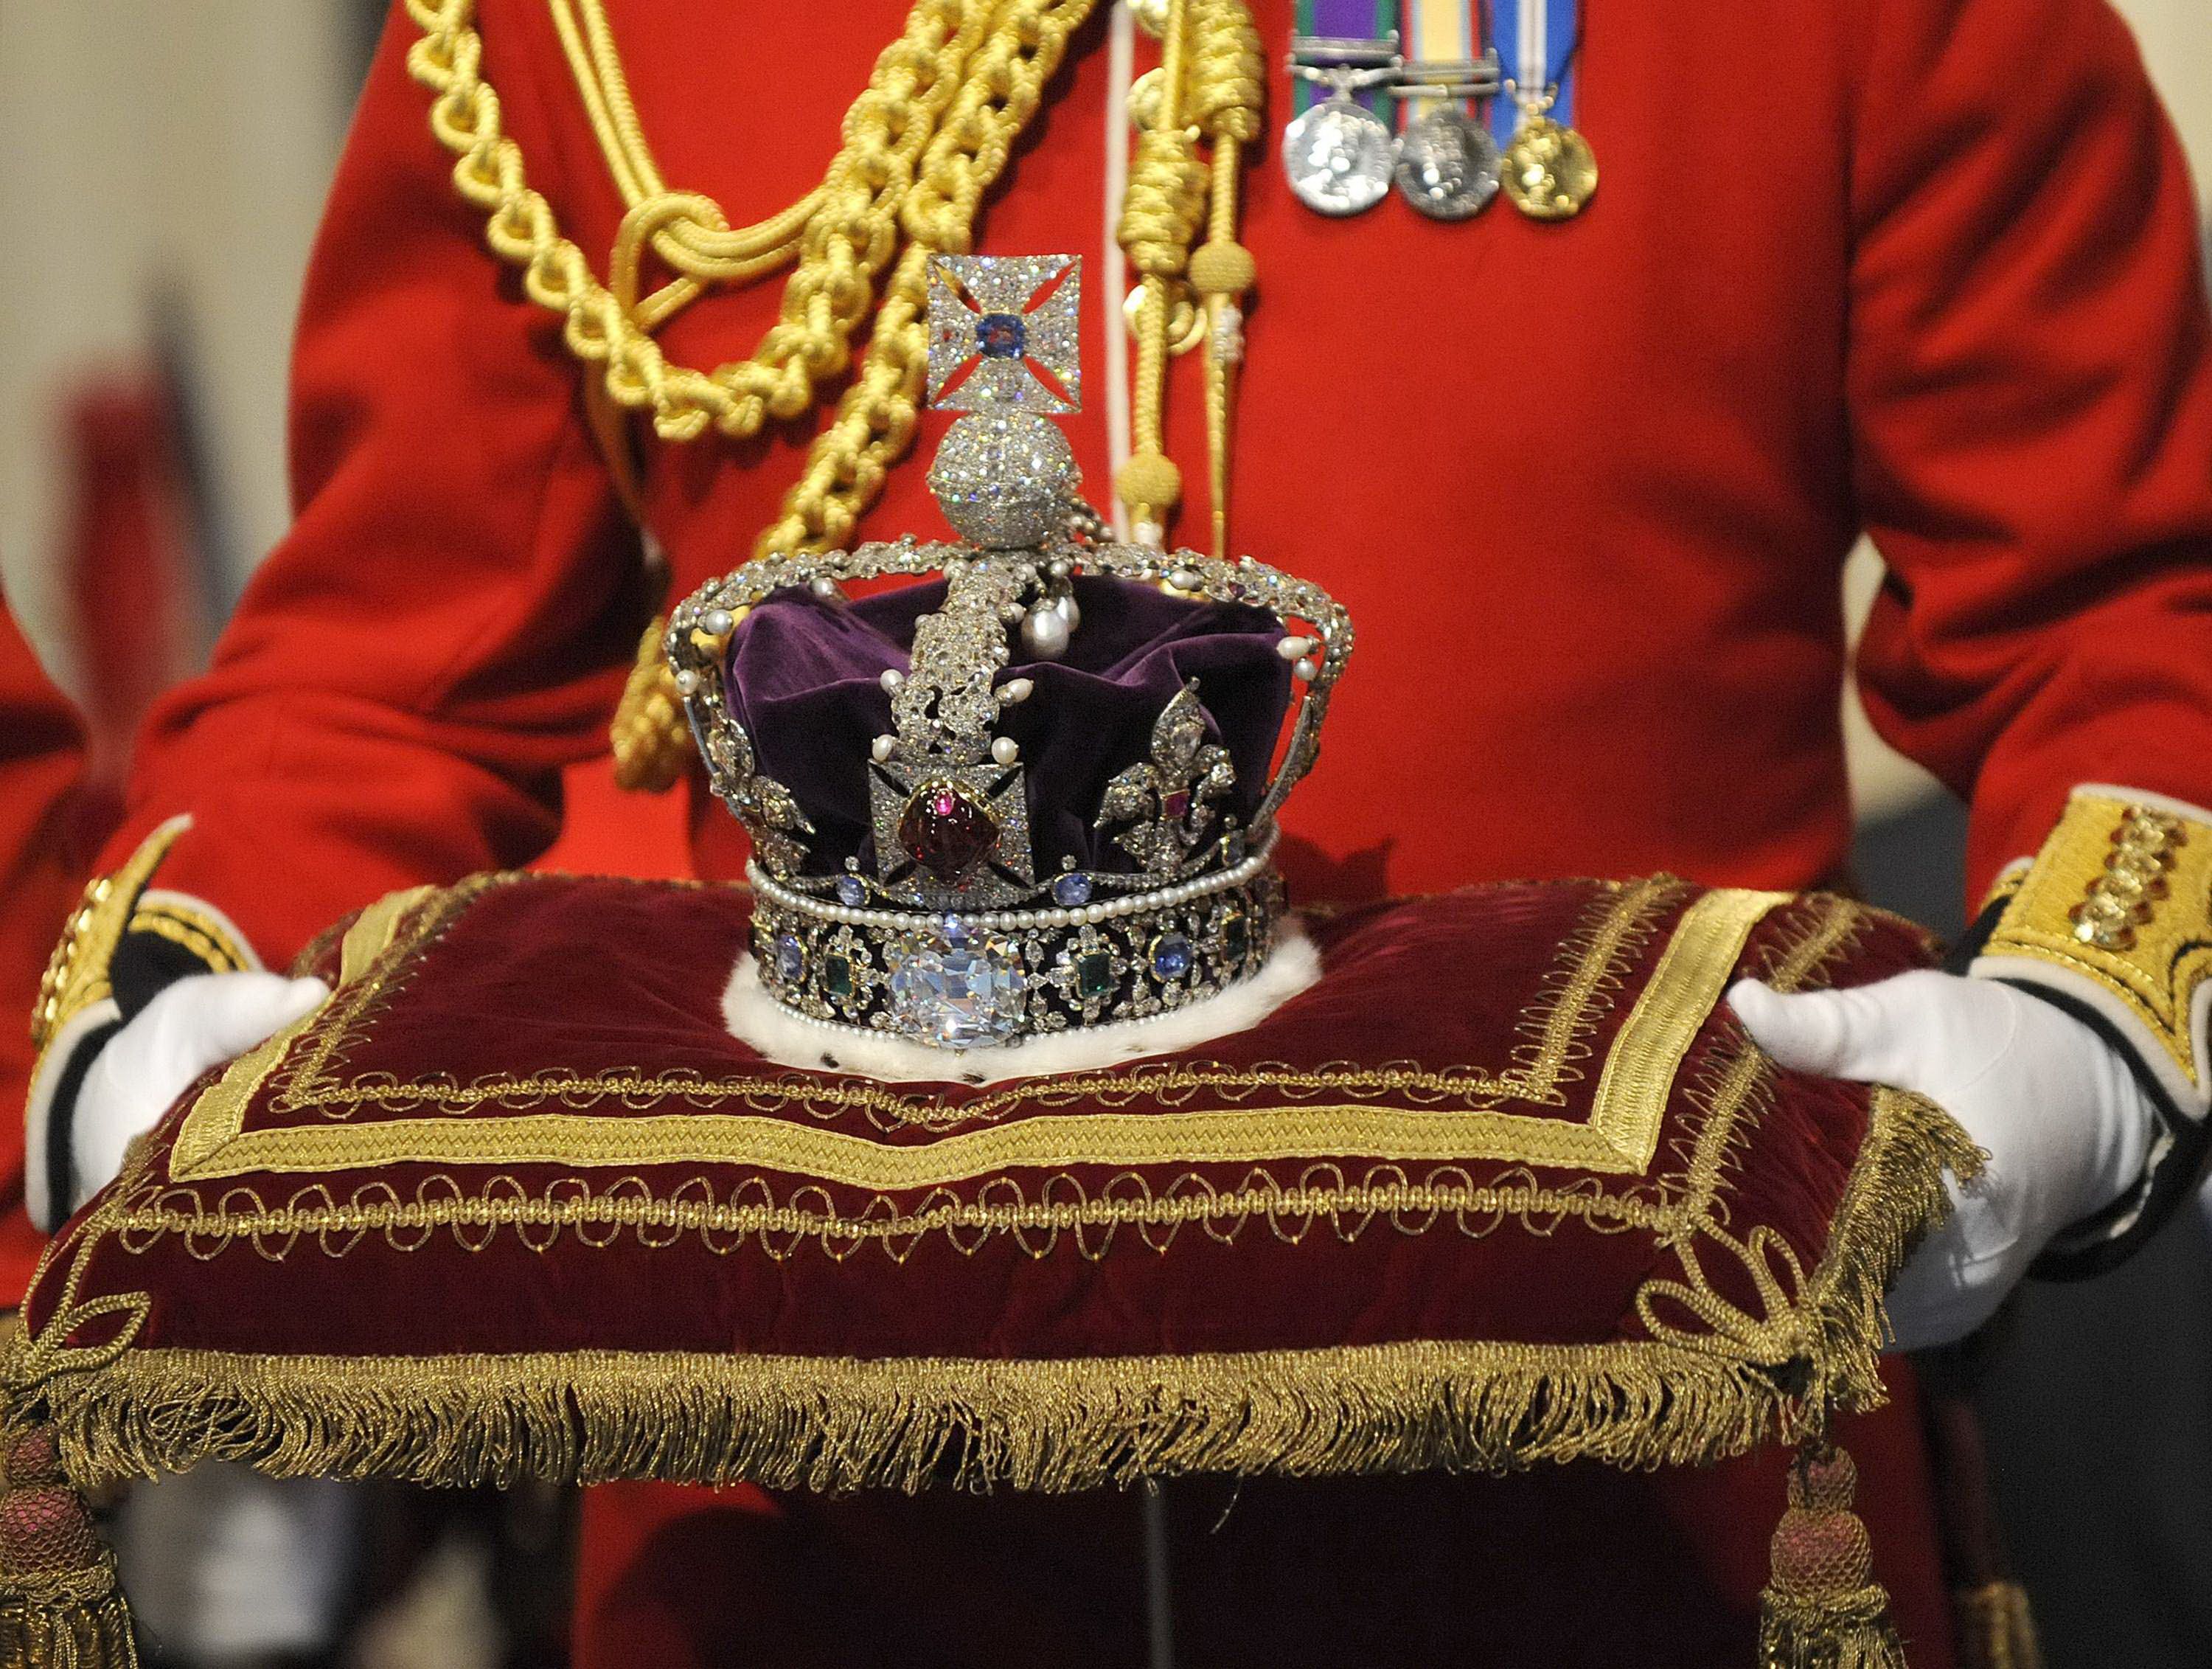 Worlds Largest Diamond Was Cut For The Crown Jewels